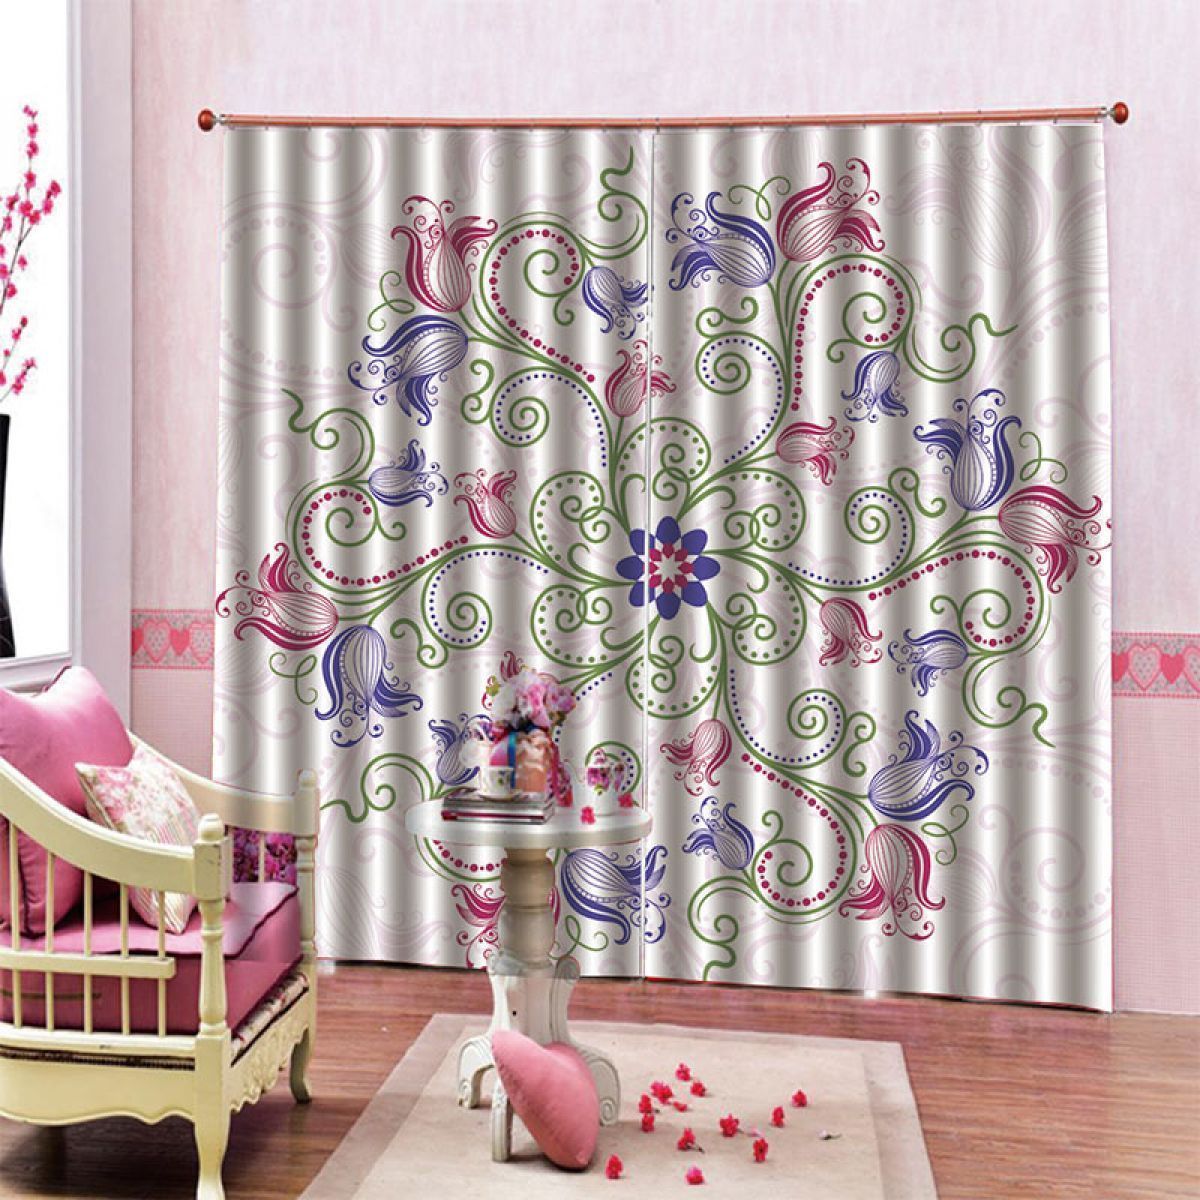 3d floral printed window curtain home decor 5642